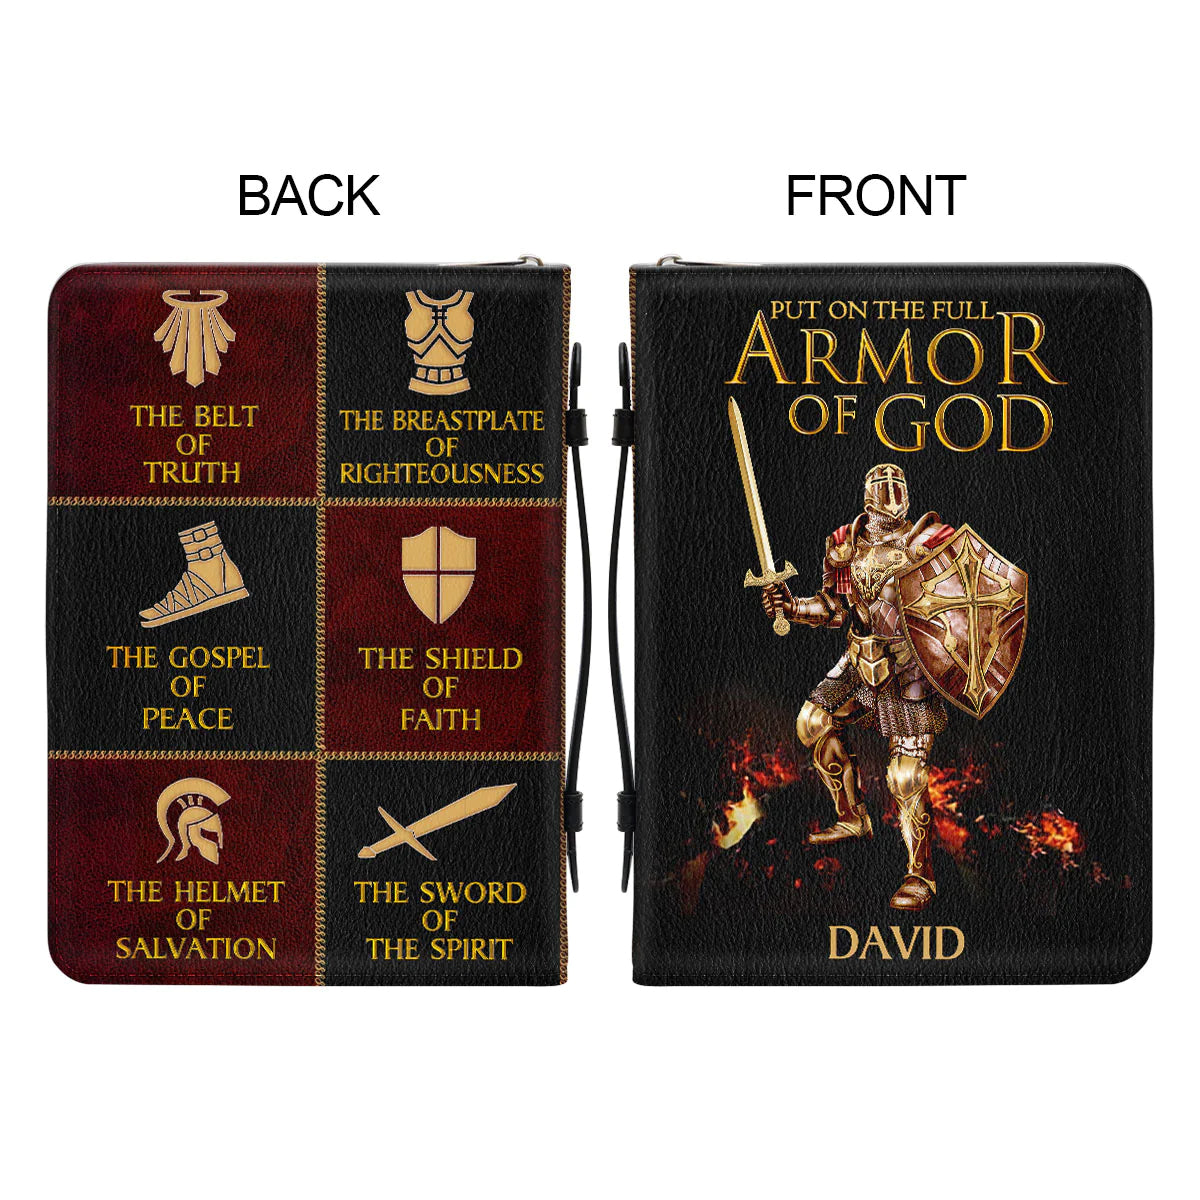 Christianart Bible Cover, Put On The Full Armor Of God, Personalized Gifts, Gifts For Women, Gifts For Men, Christmas Gift. - Christian Art Bag